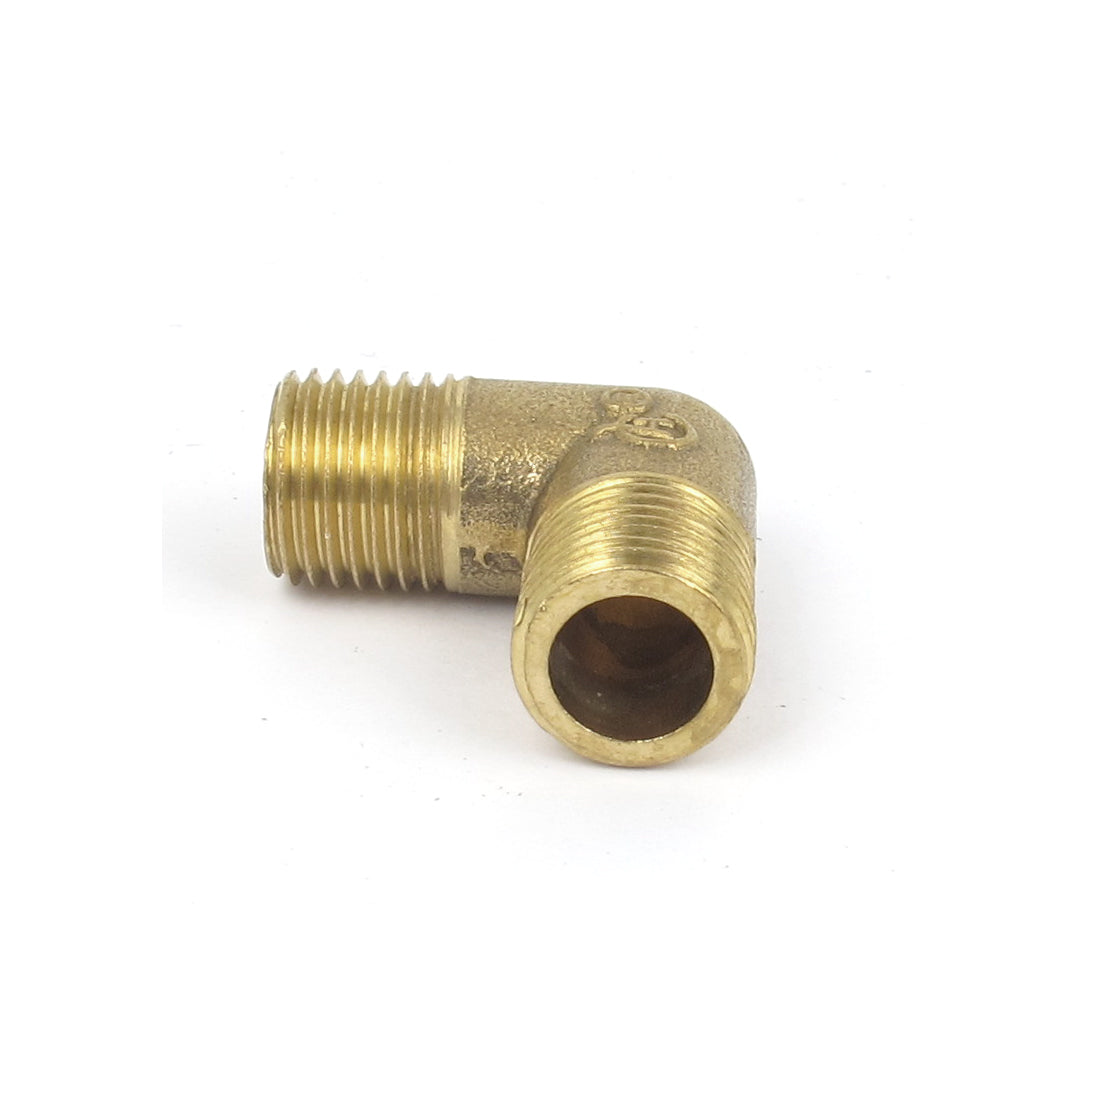 uxcell Uxcell 5Pcs Brass Pipe 90 Degree 1/4BSP Male to Male Thread Water Fuel Elbow Fitting